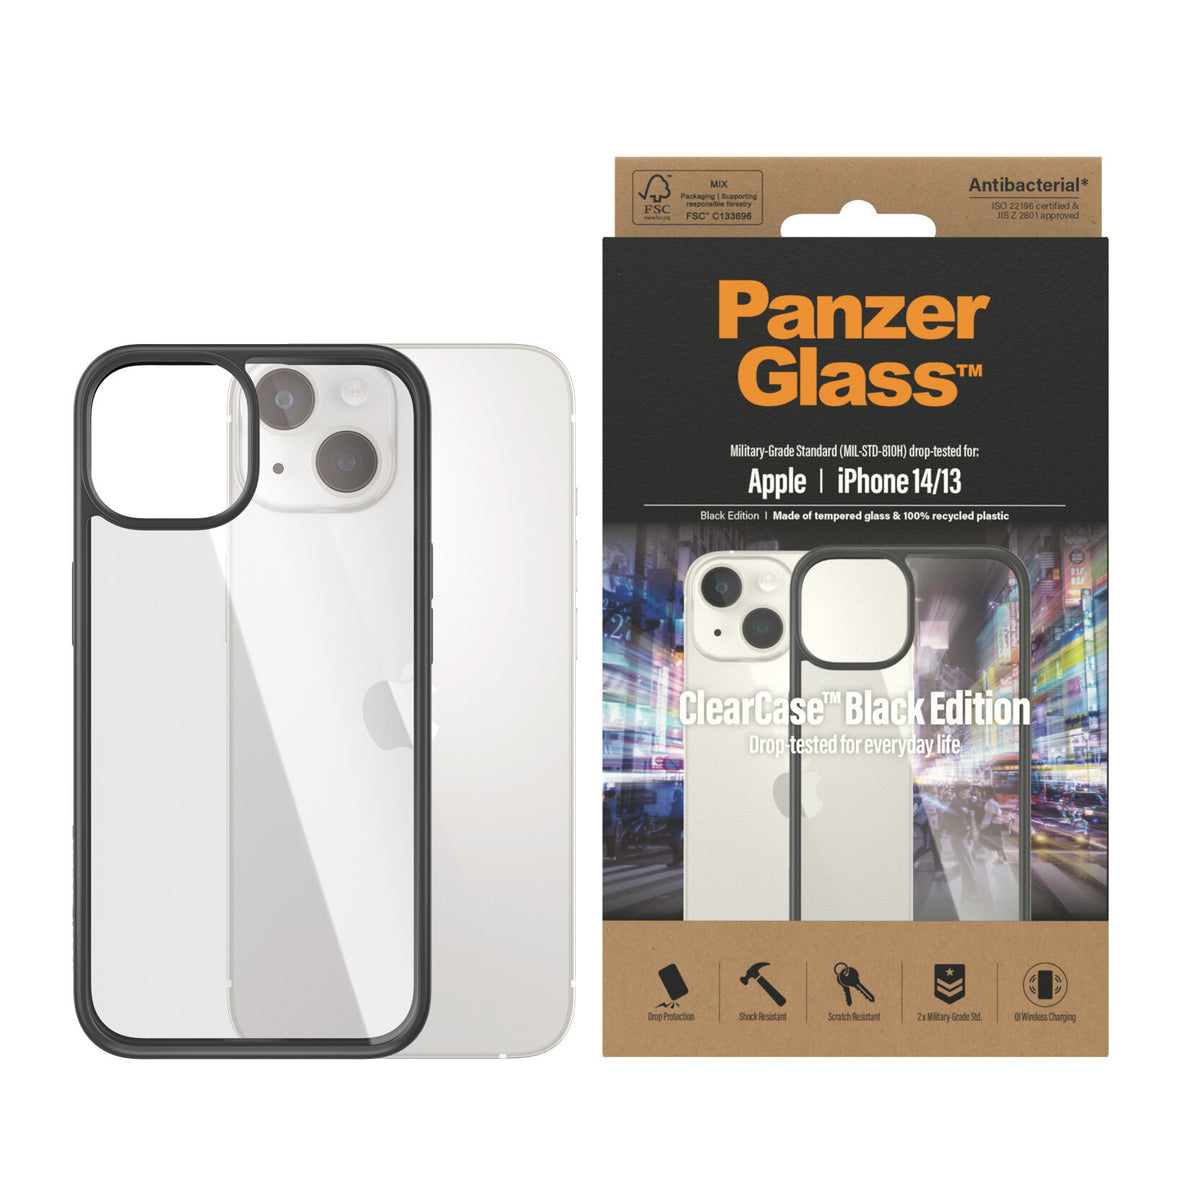 PanzerGlass ® ClearCase for iPhone 14 / 13 in Black